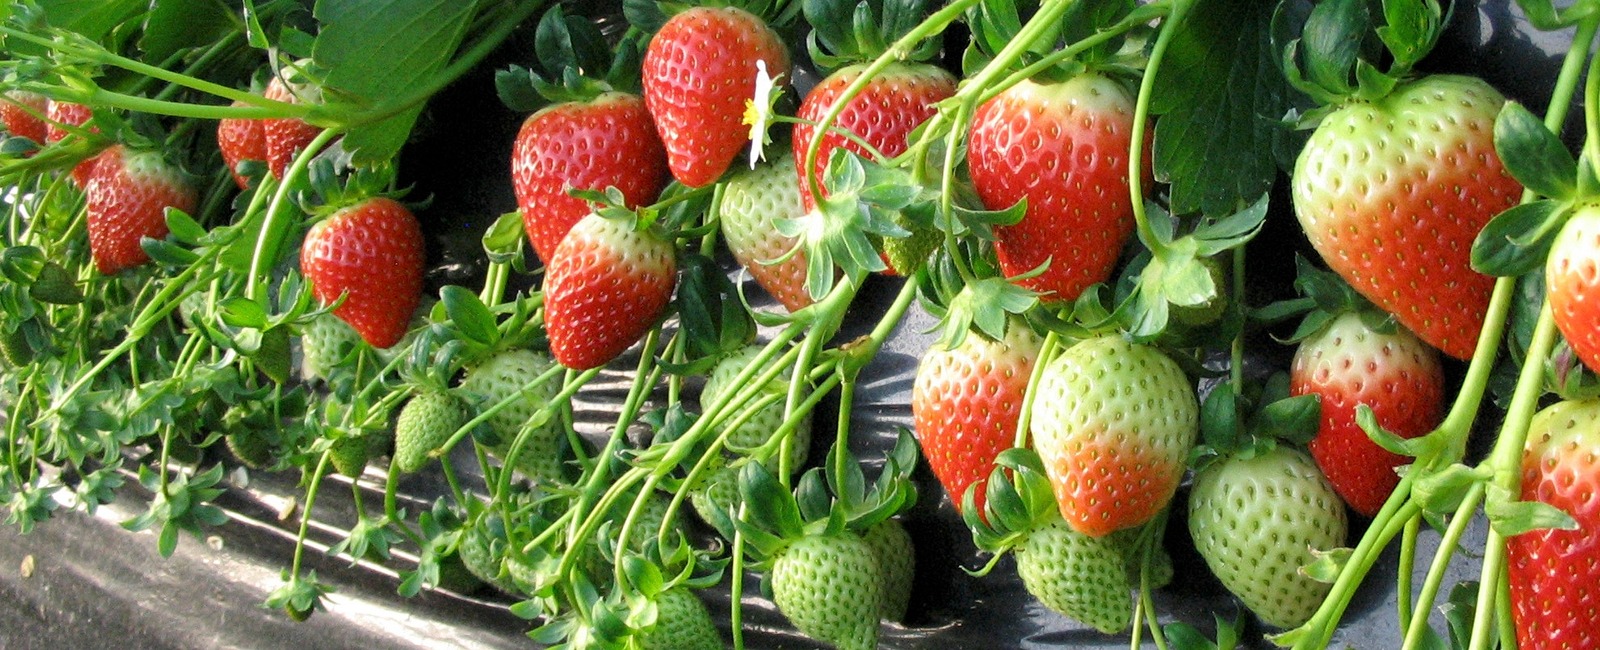 How crop nutrition affects strawberries